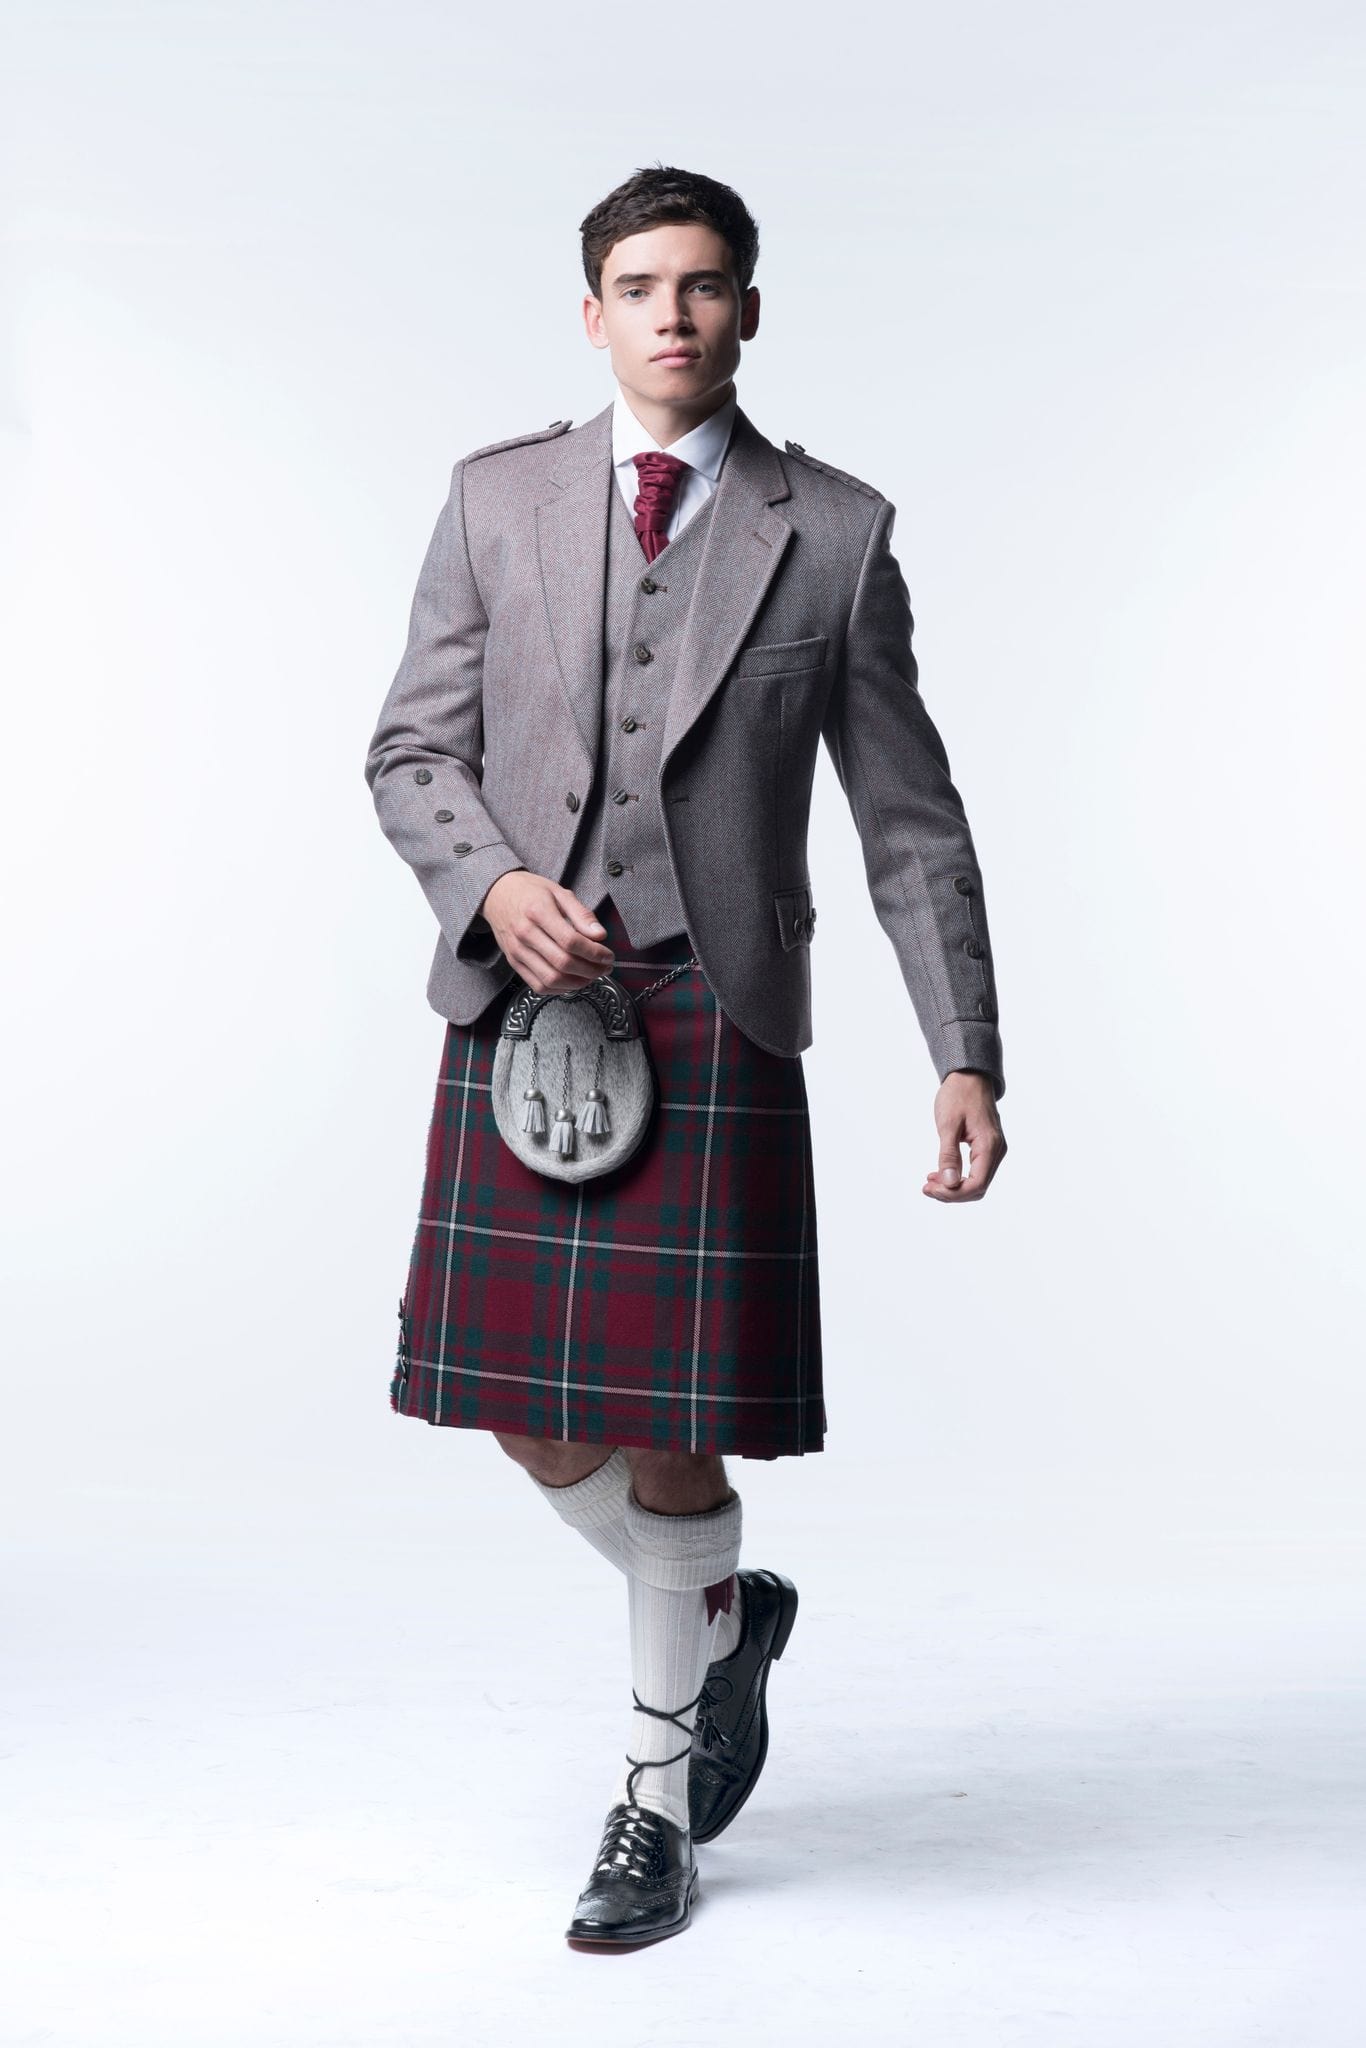 Russet Red Tweed Kilt Outfit - MacGregor and MacDuff